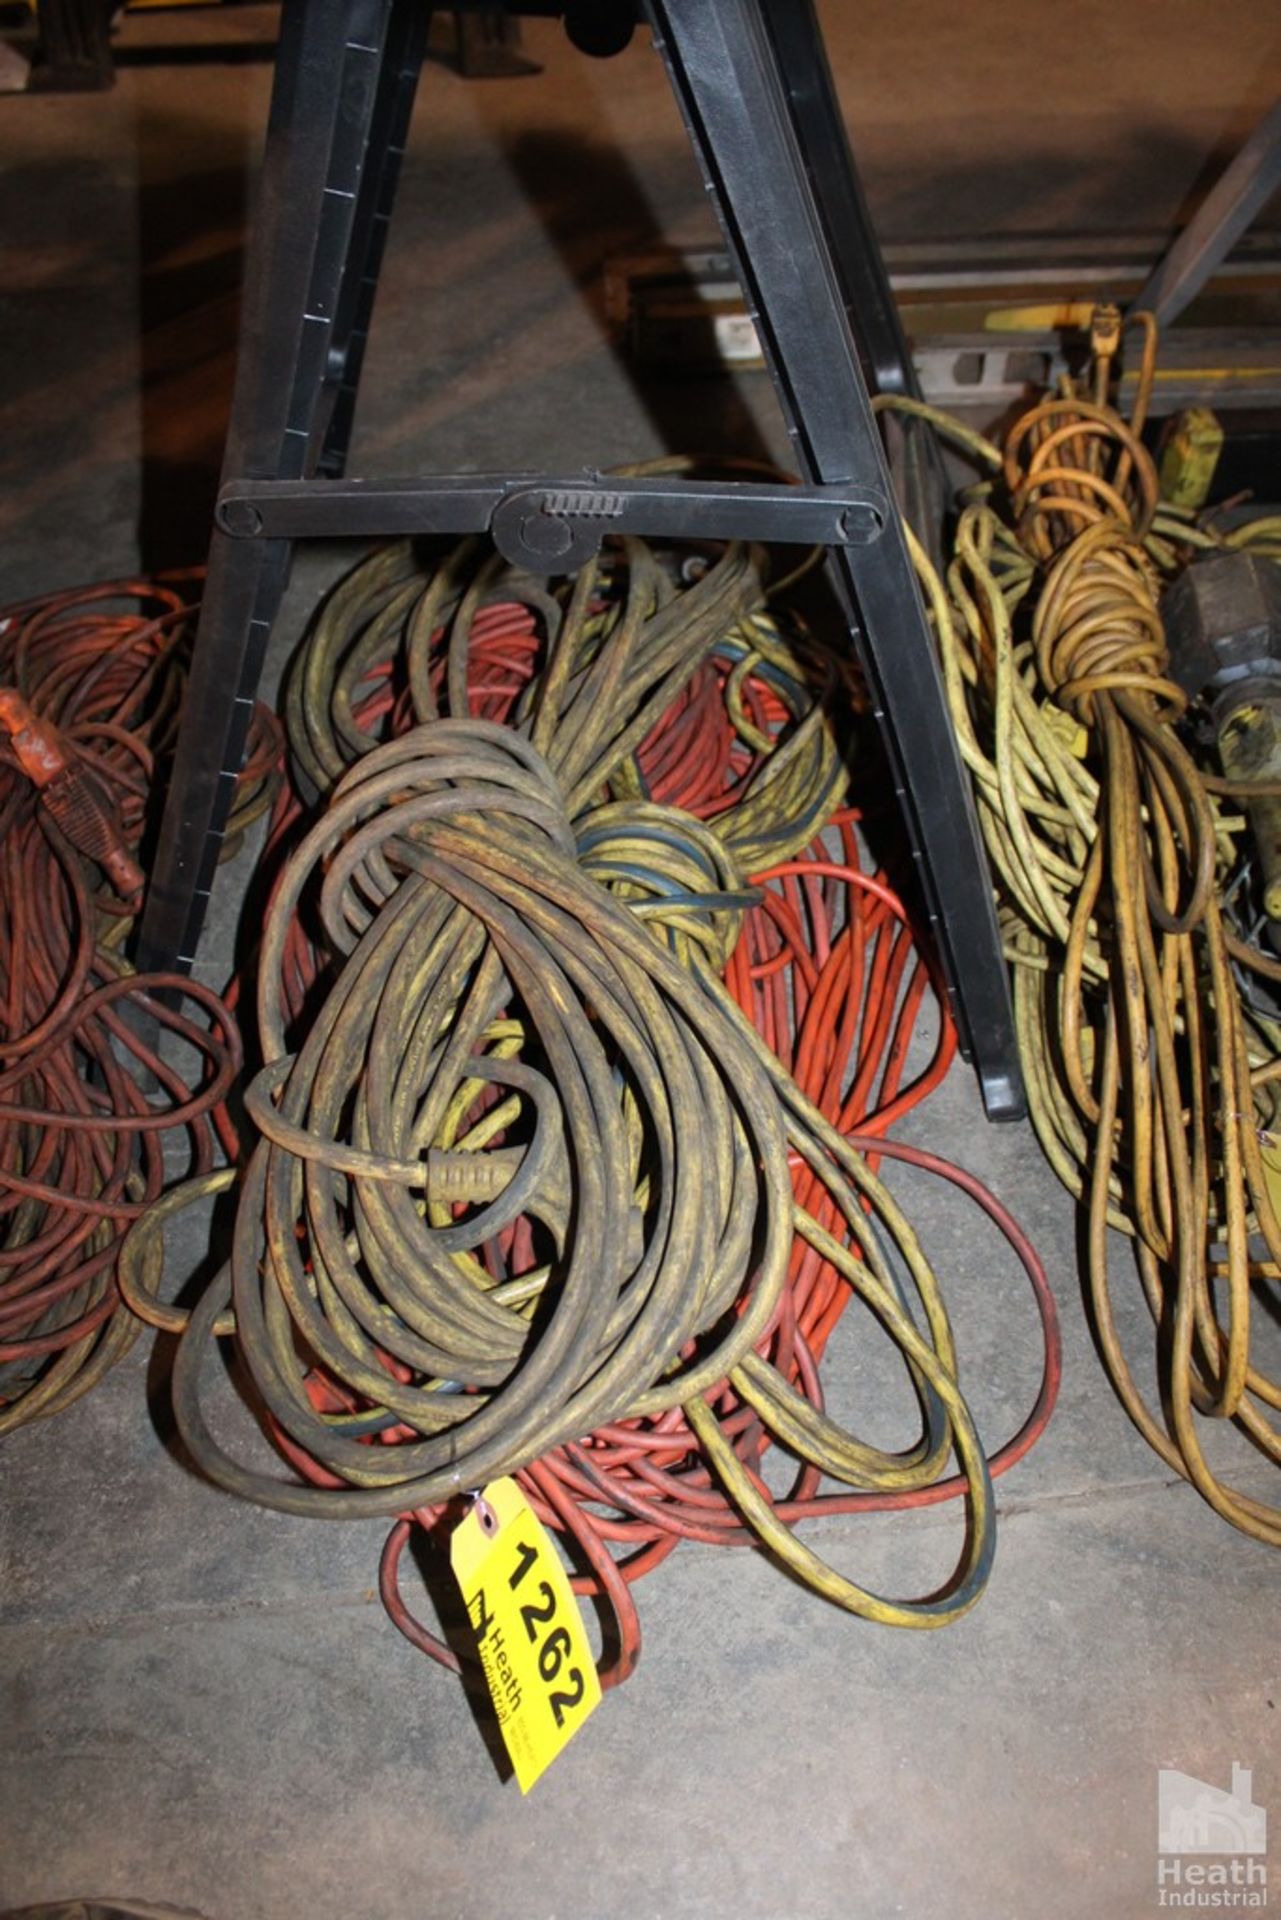 (4) HEAVY DUTY EXTENSION CORDS